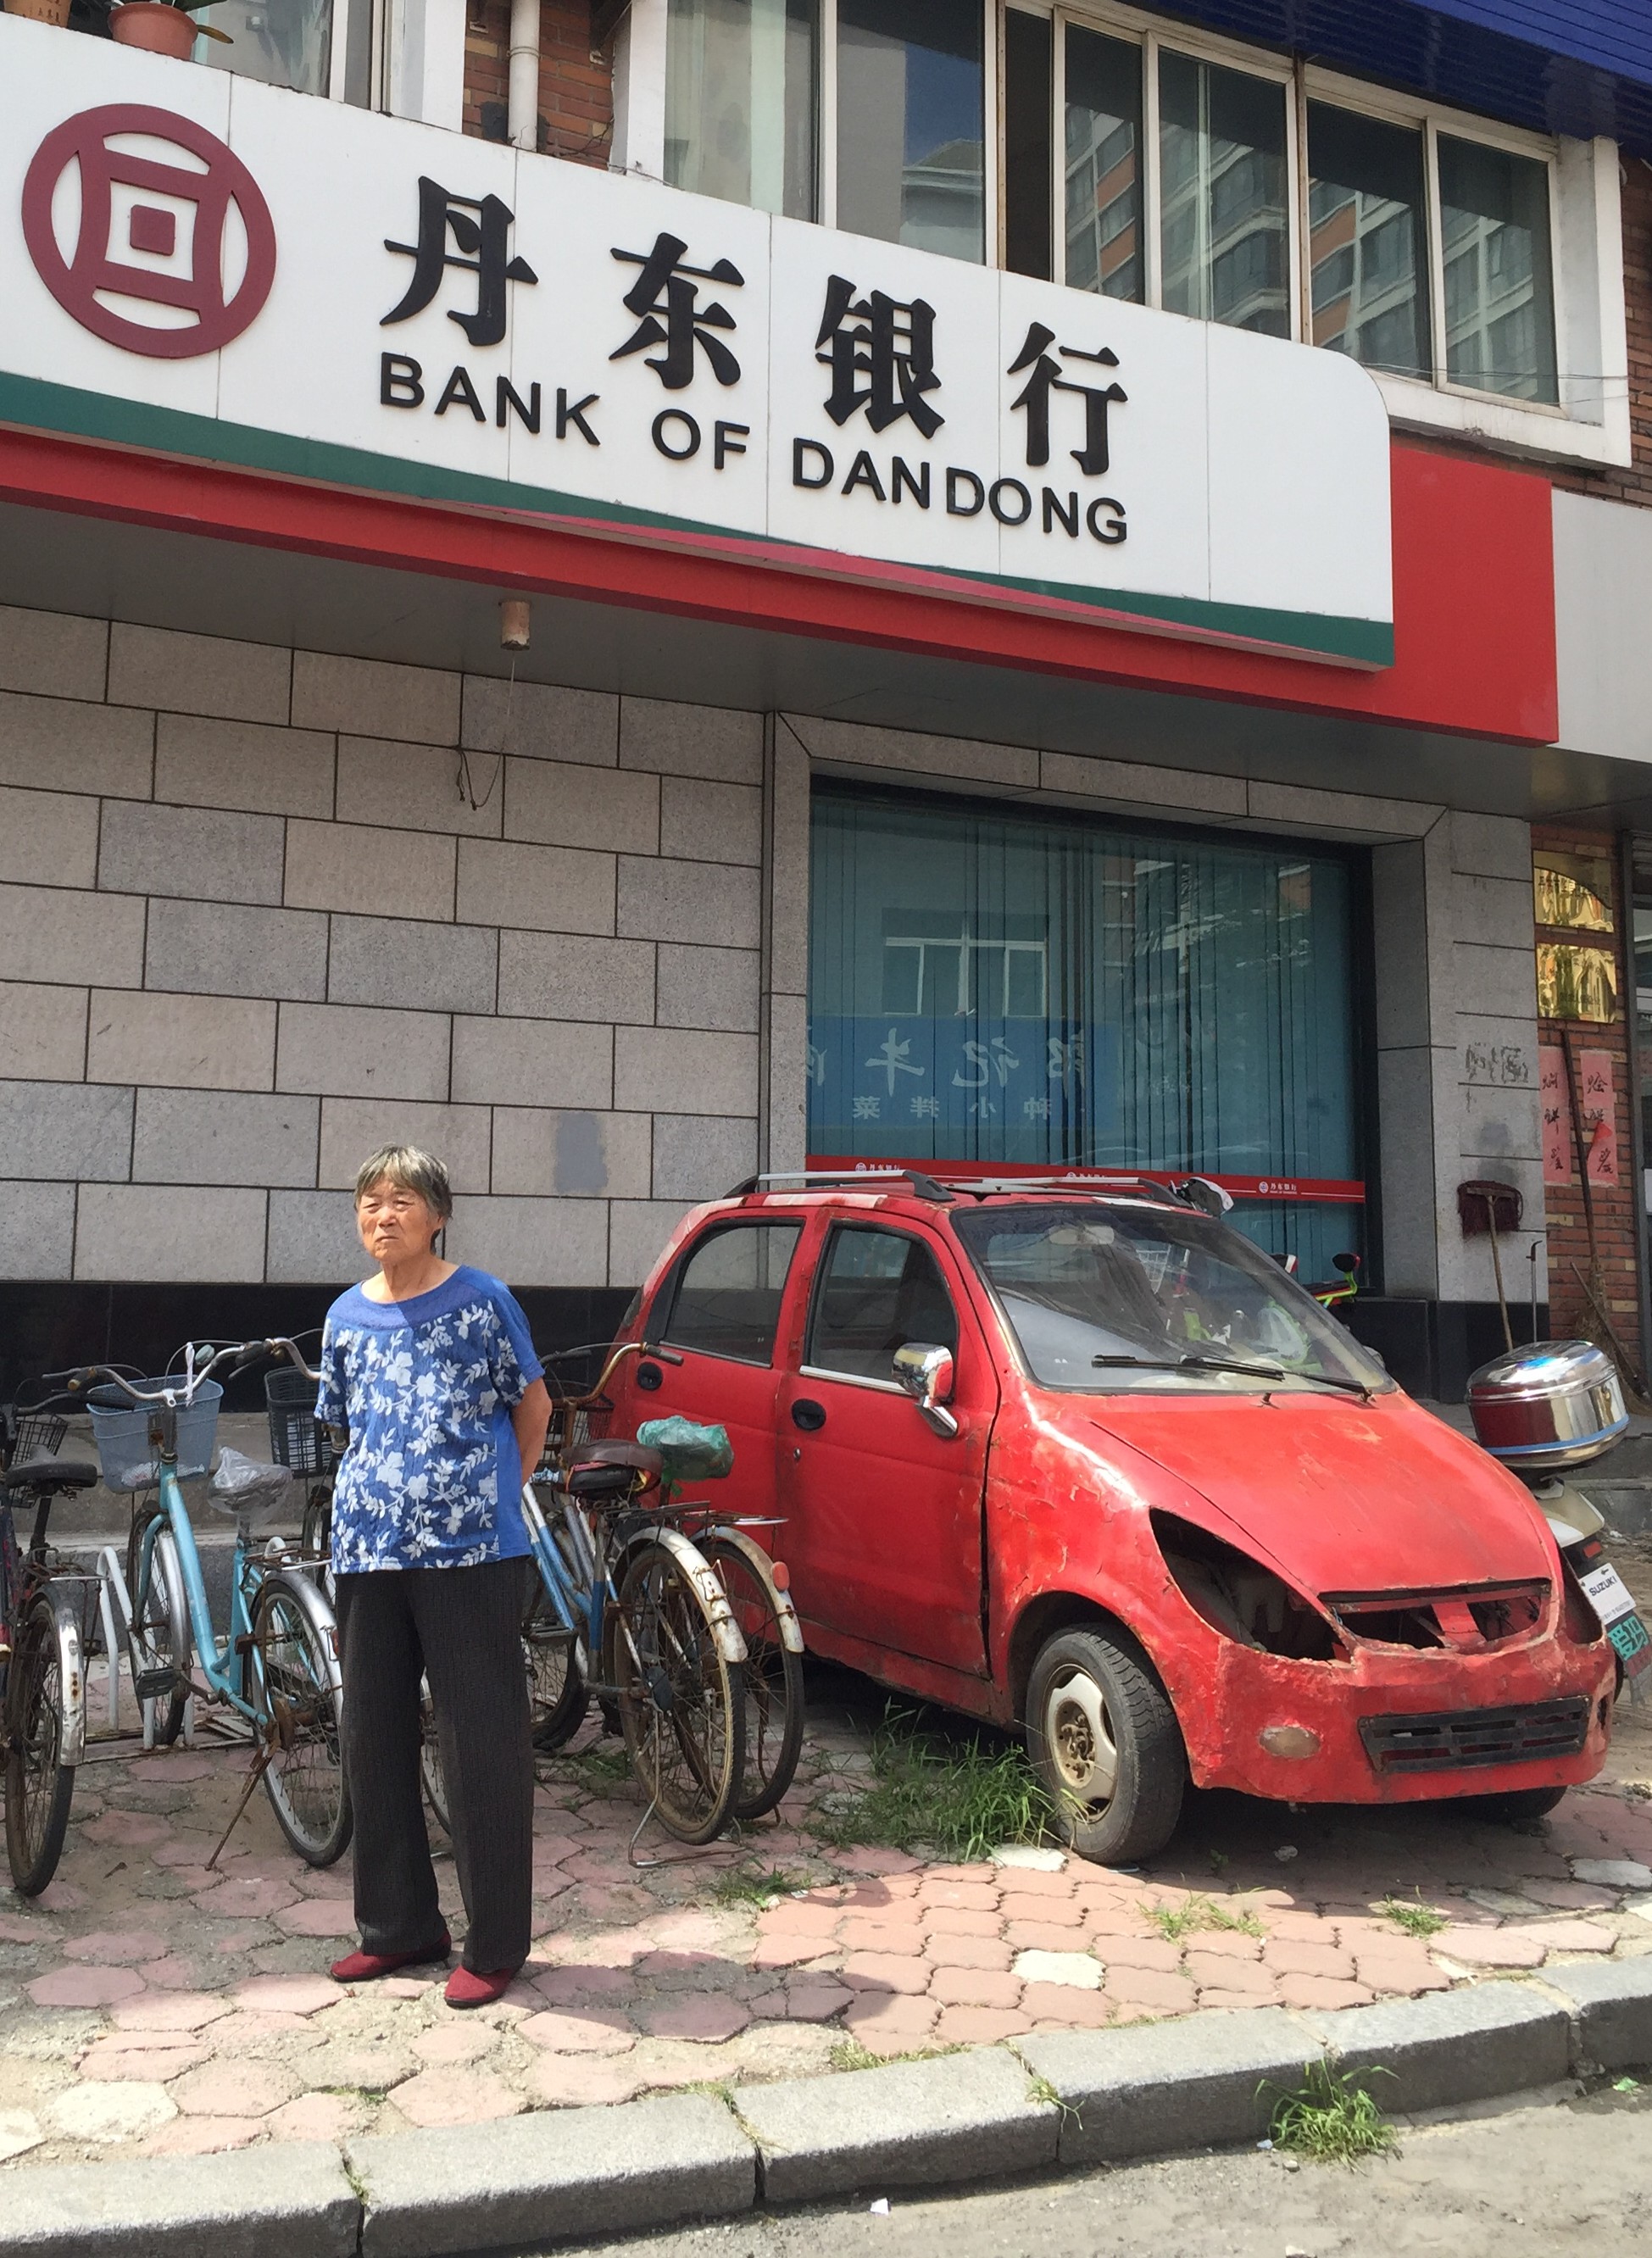 Bank of Dandong accused by US government of helping Pyongyang launder money to avoid sanctions